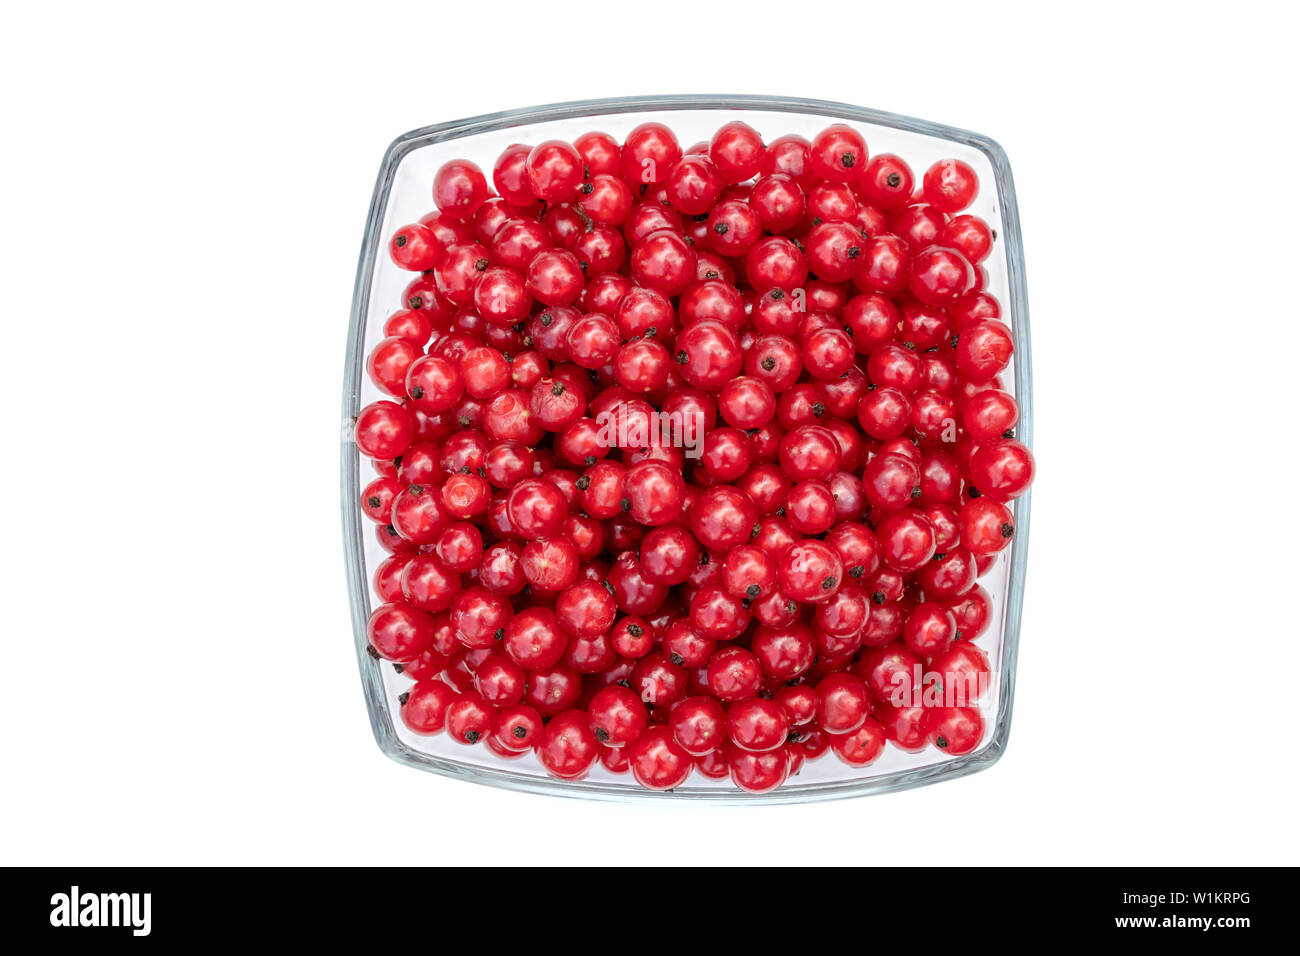 Description: Redcurrants in glass bowl isolated on white background Stock Photo